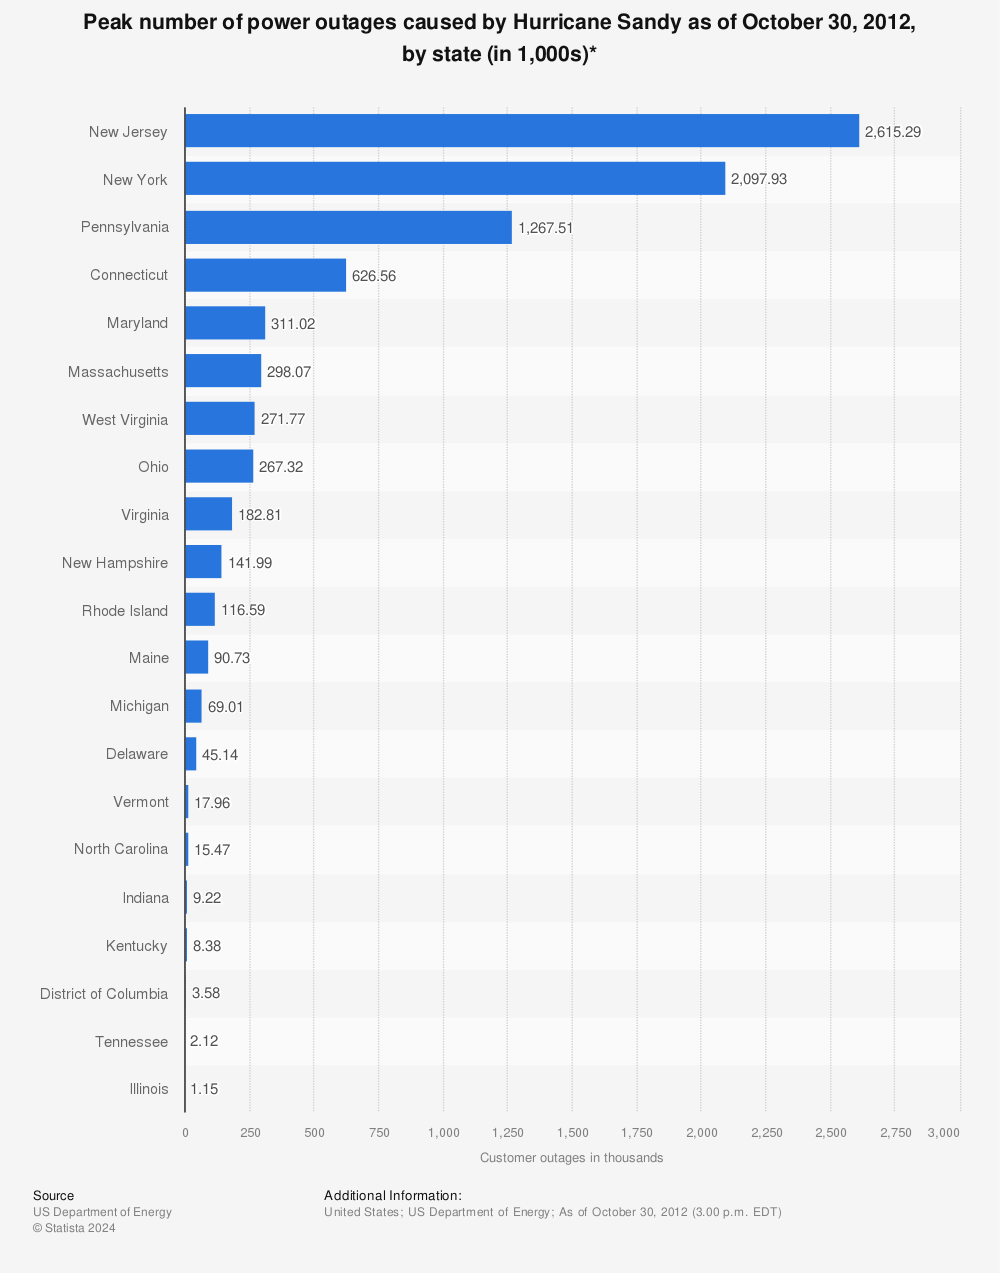 Statistic: Peak number of power outages caused by Hurricane Sandy as of October 30, 2012, by state (in 1,000s)* | Statista